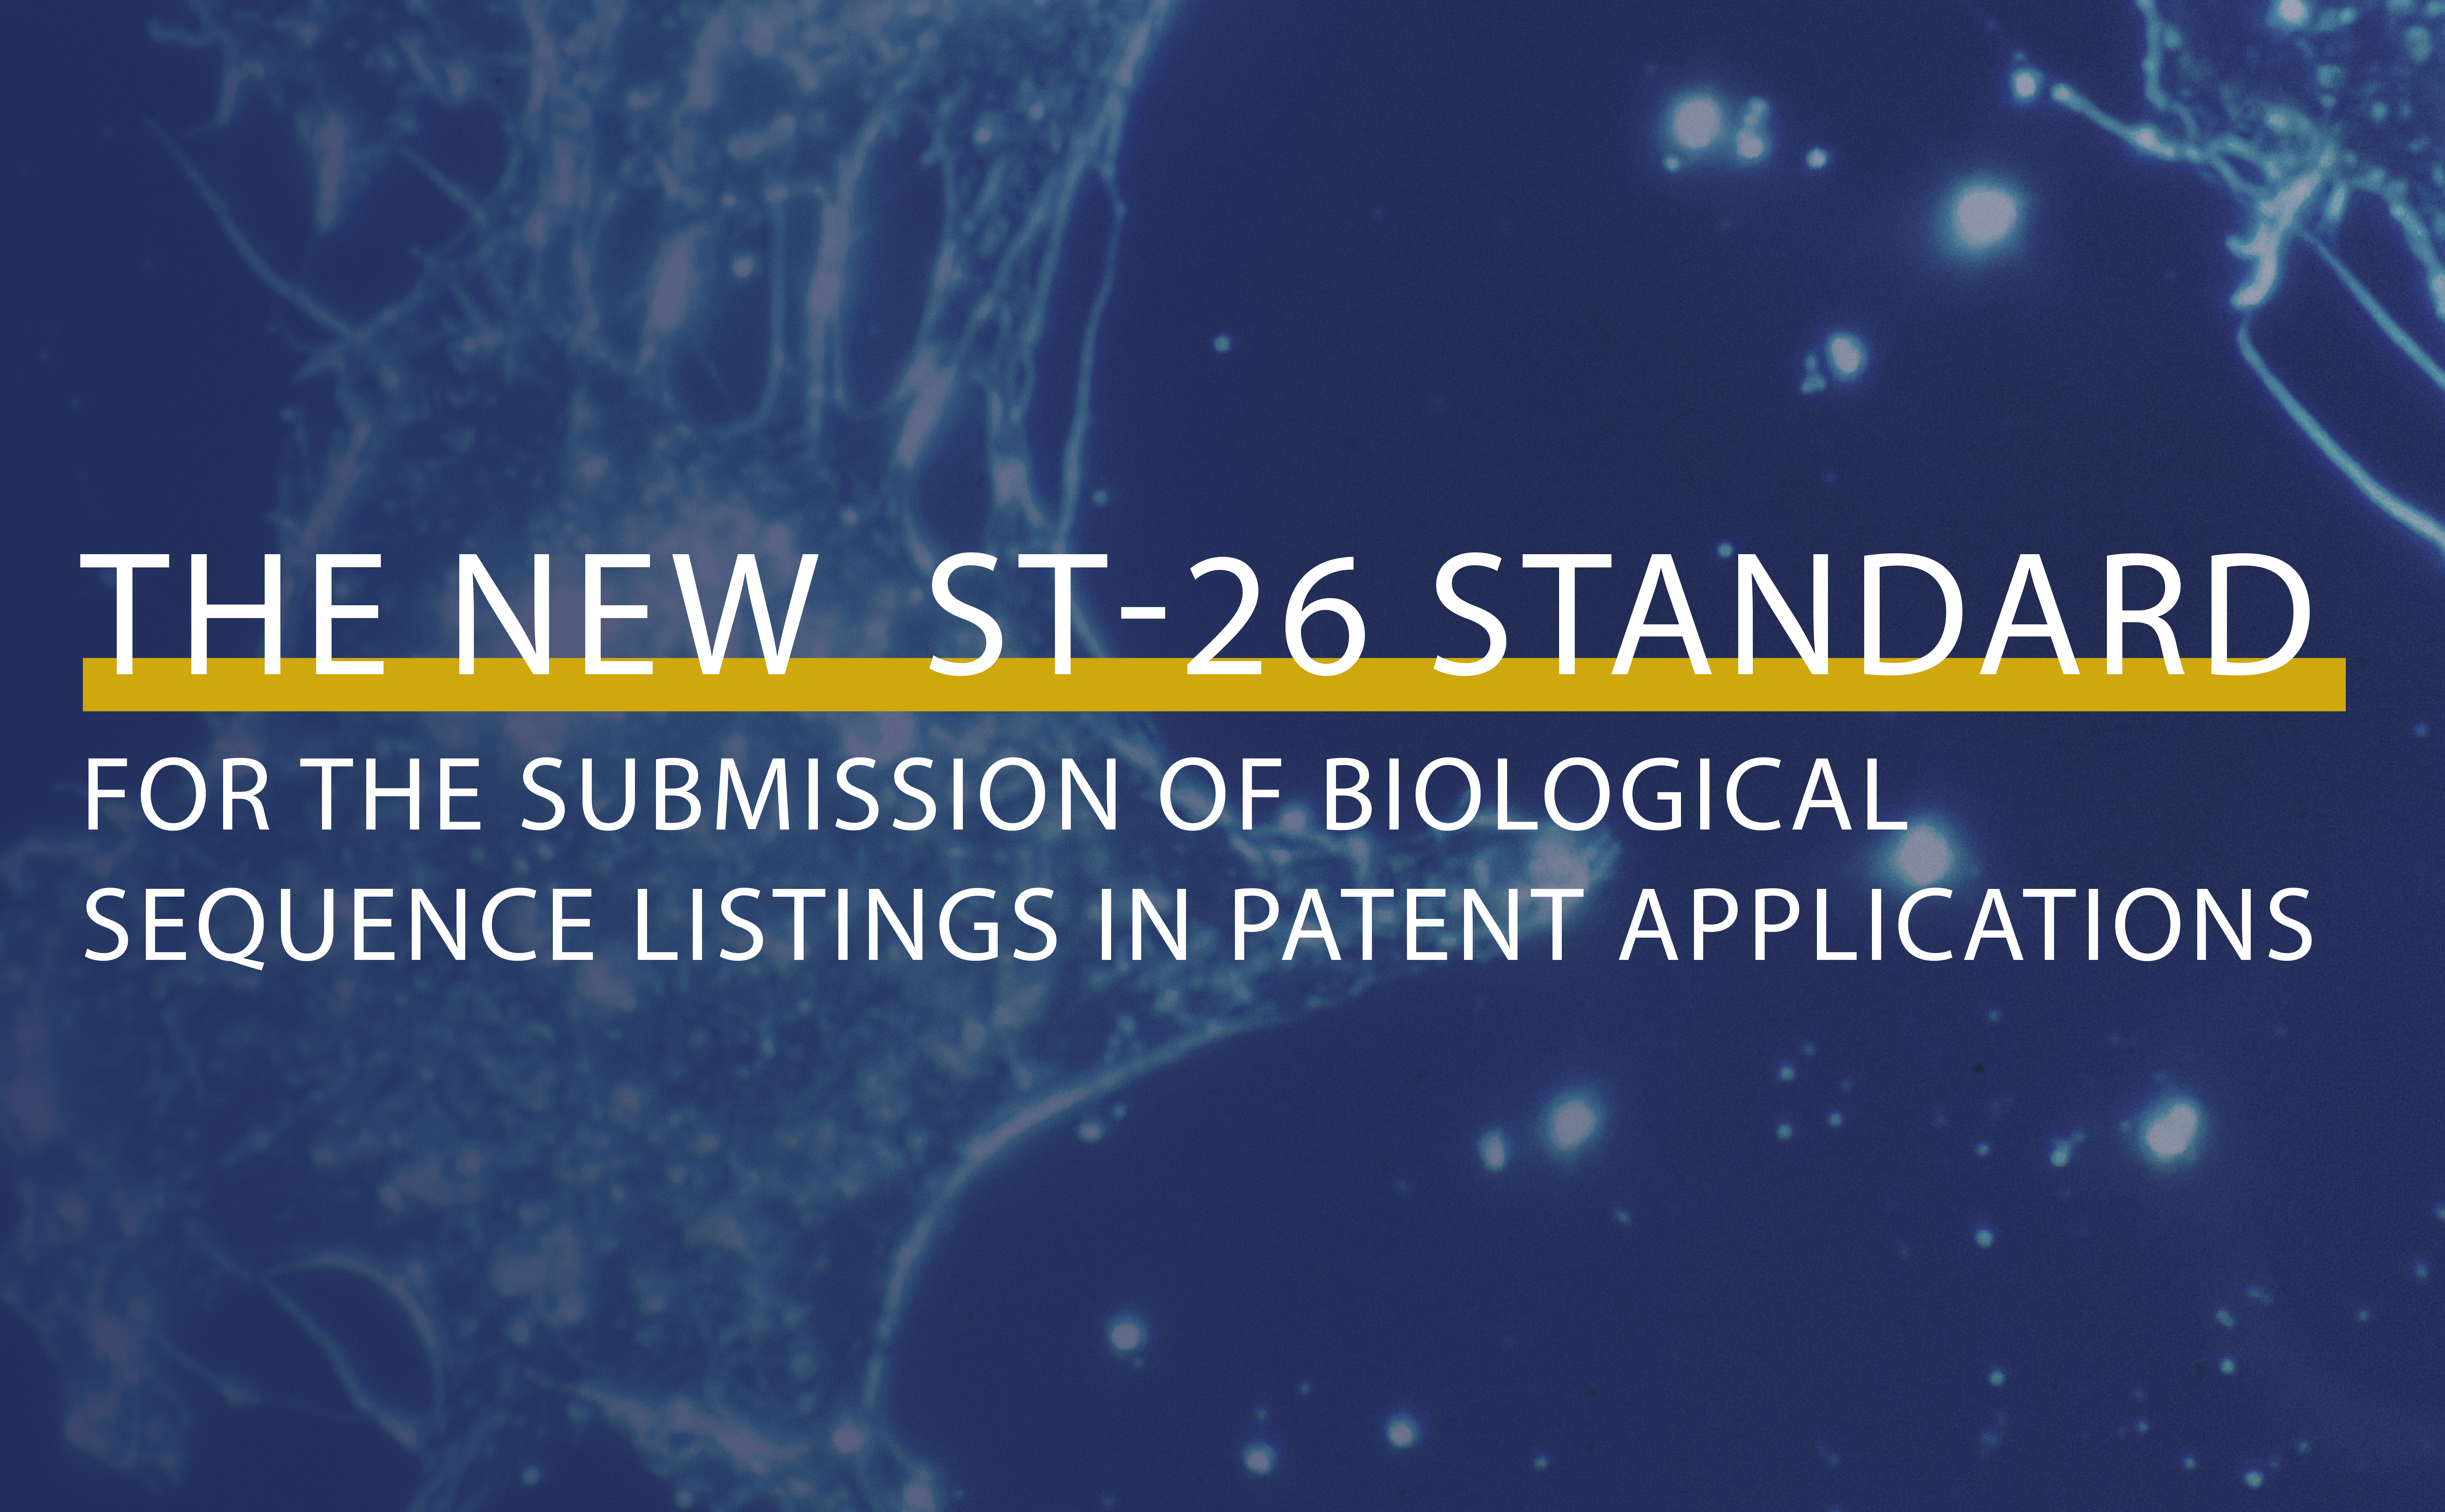 NEW ST-26 STANDARD FOR THE SUBMISSION OF BIOLOGICAL SEQUENCE LIST IN PATENT APPLICATIONS